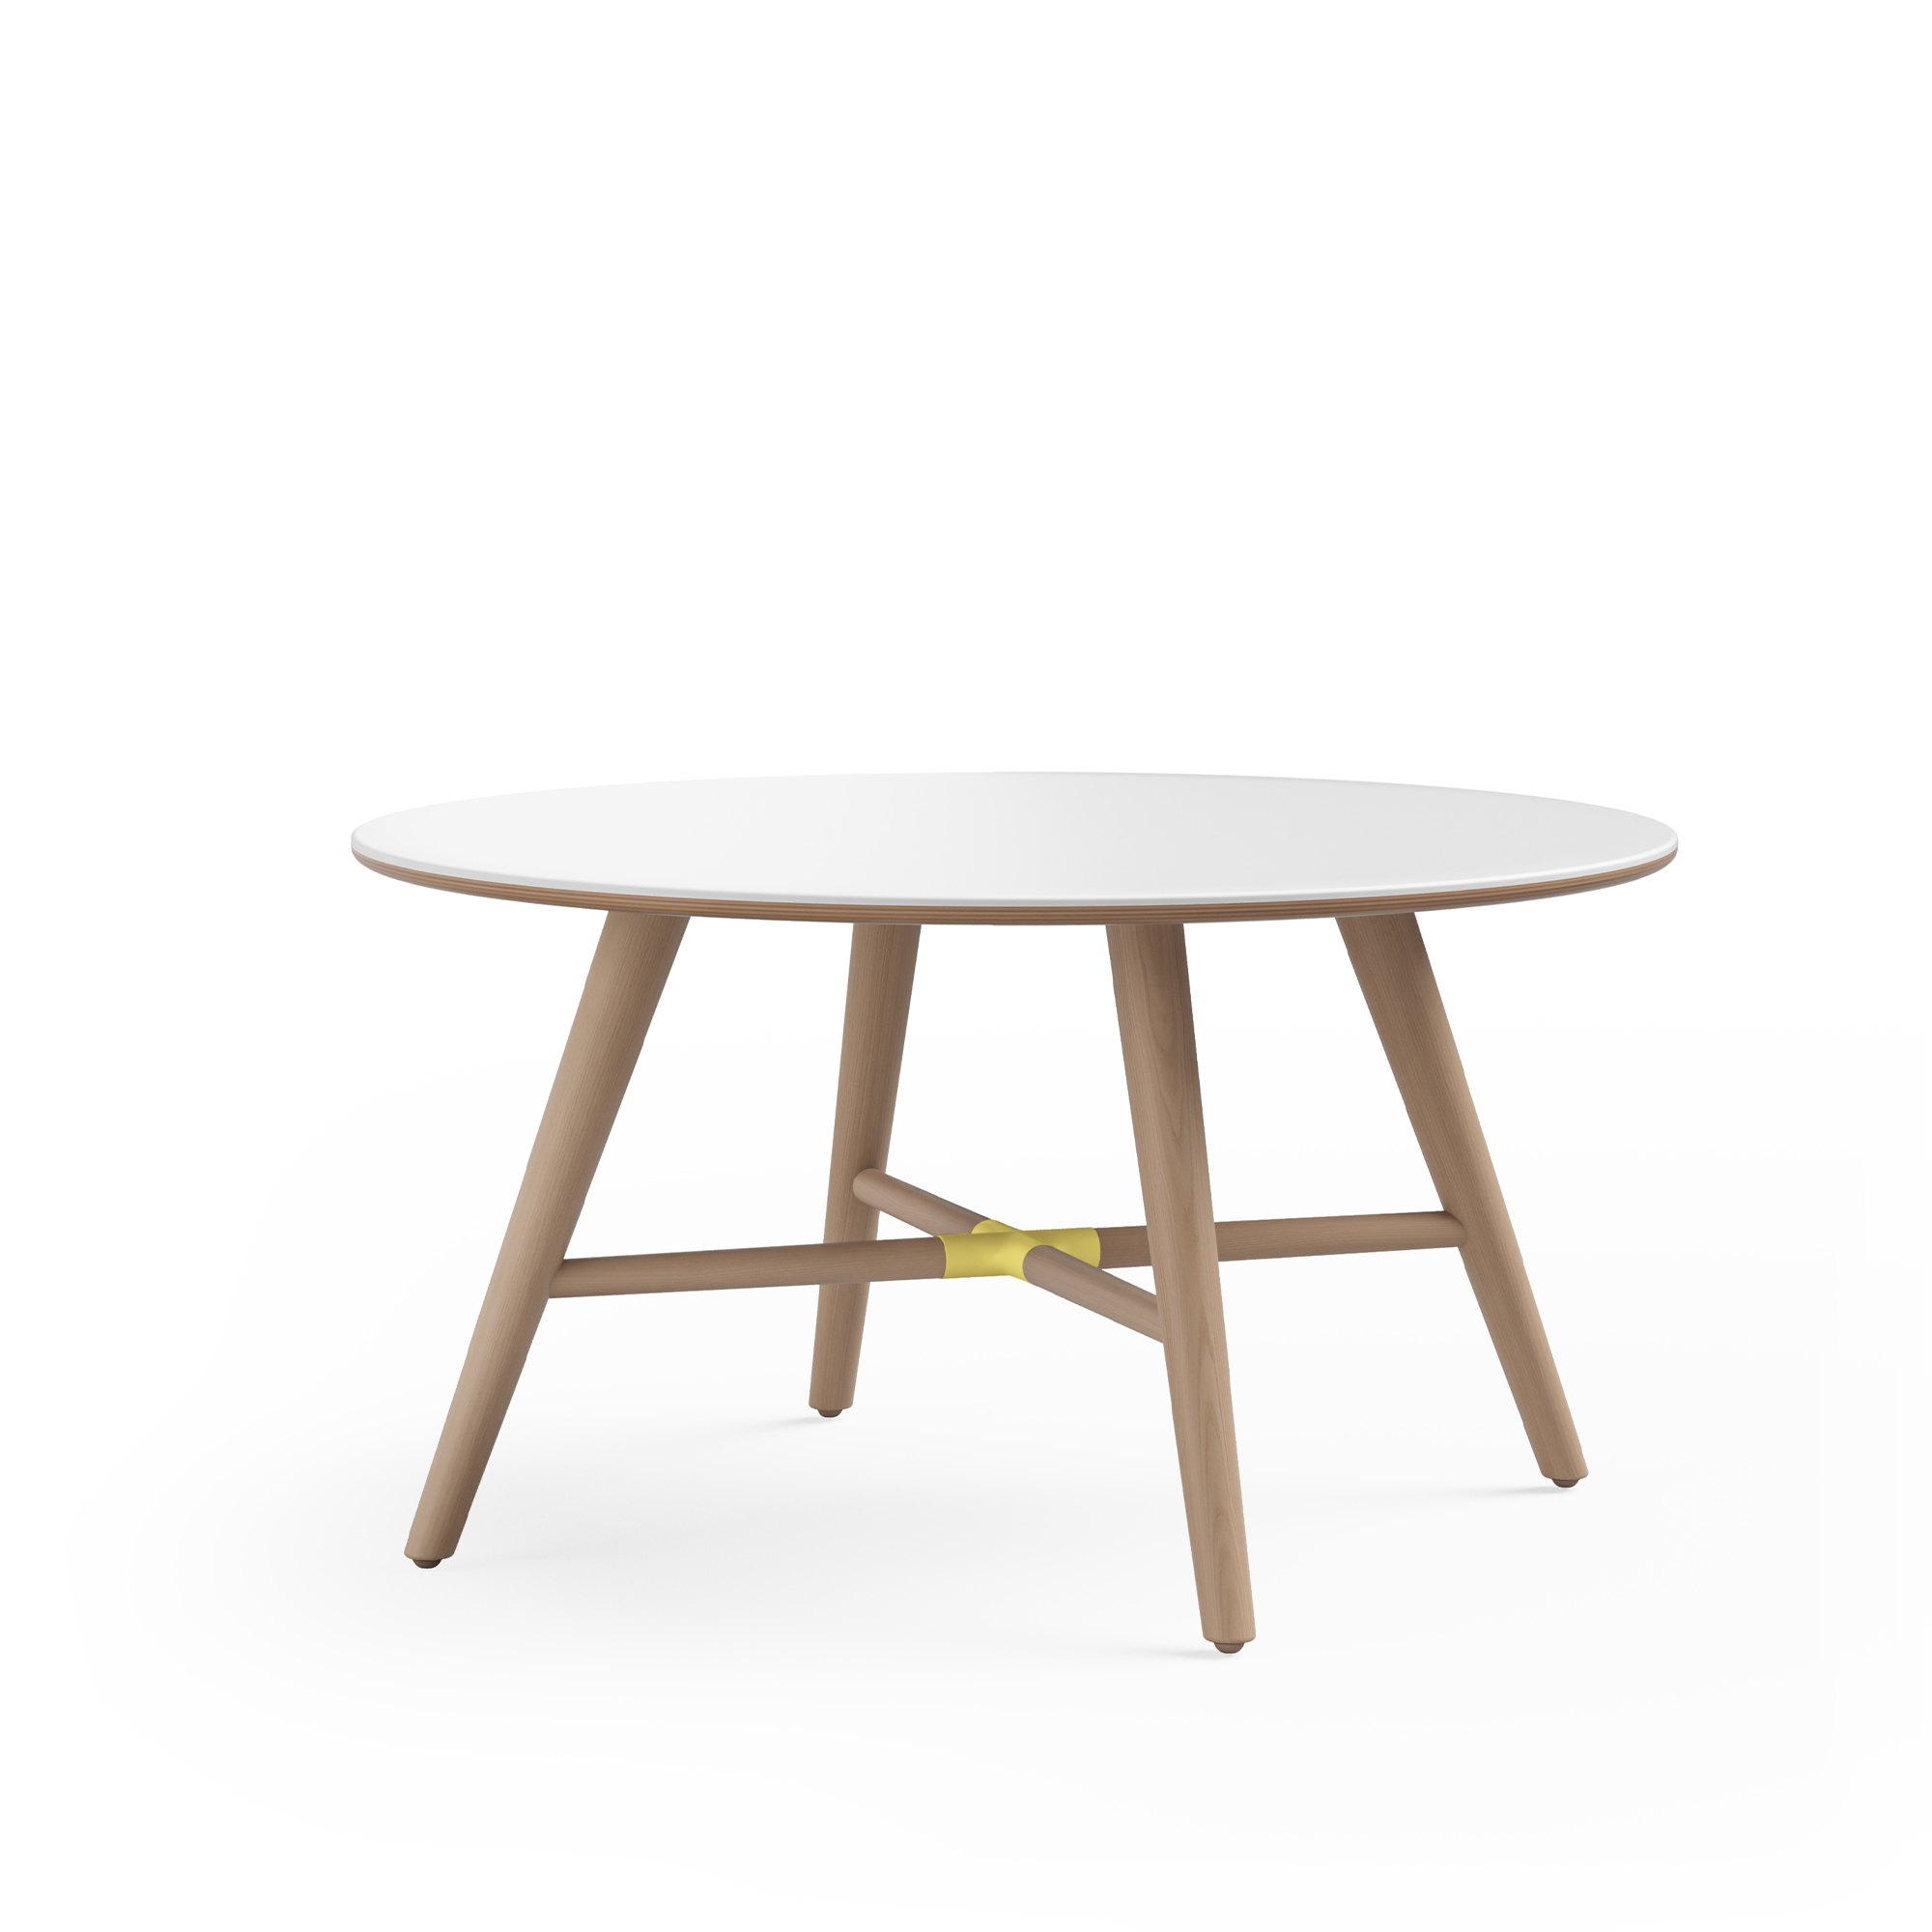 Sunny Table 30dia X 16H, Yellow Connector